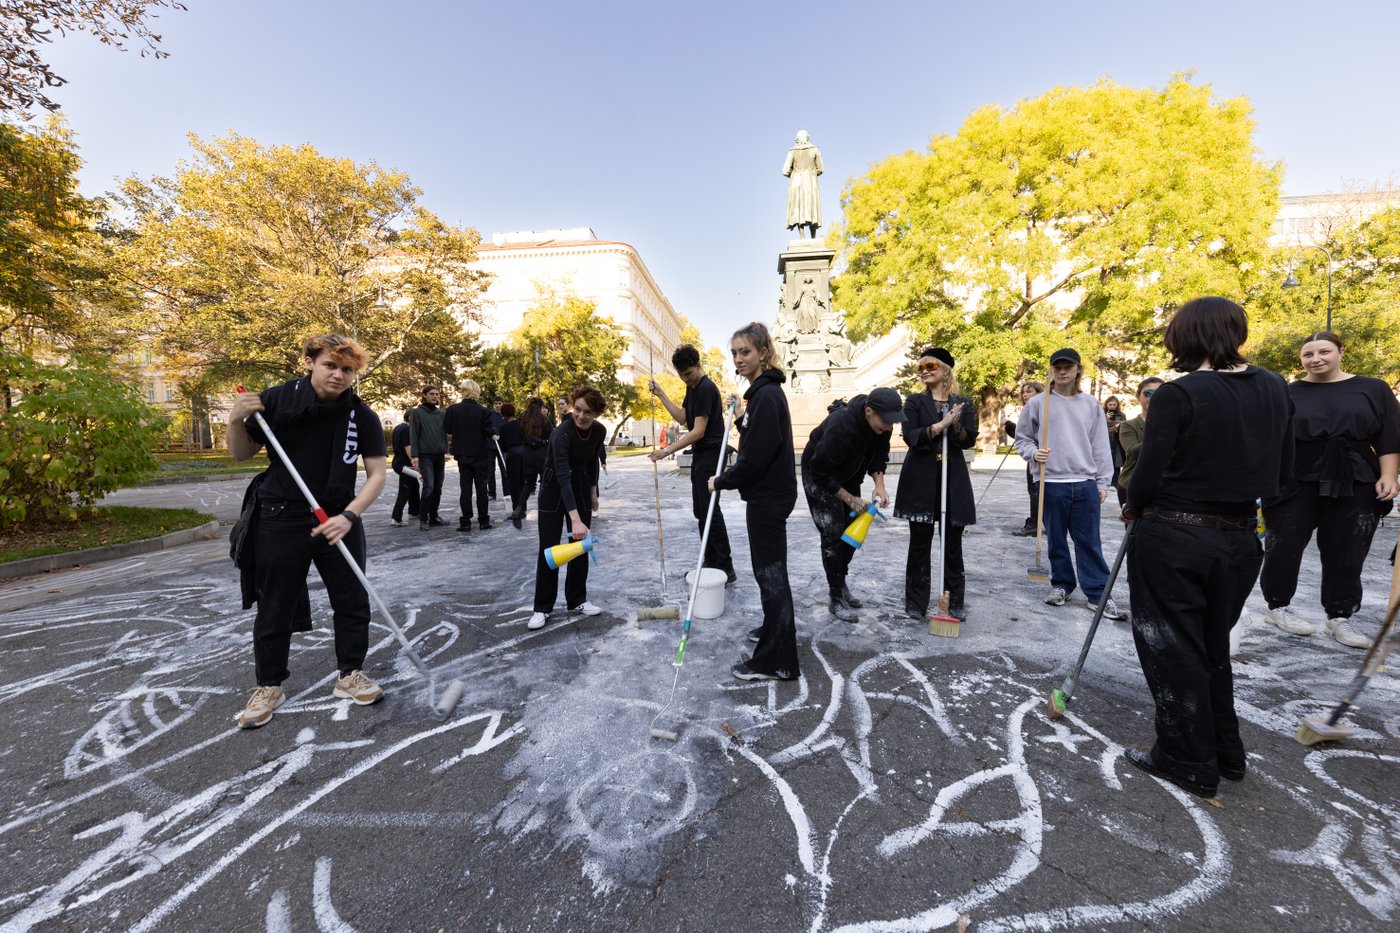 Several students working together to draw a chalk drawing with white paint and brooms on Schillerplatz.